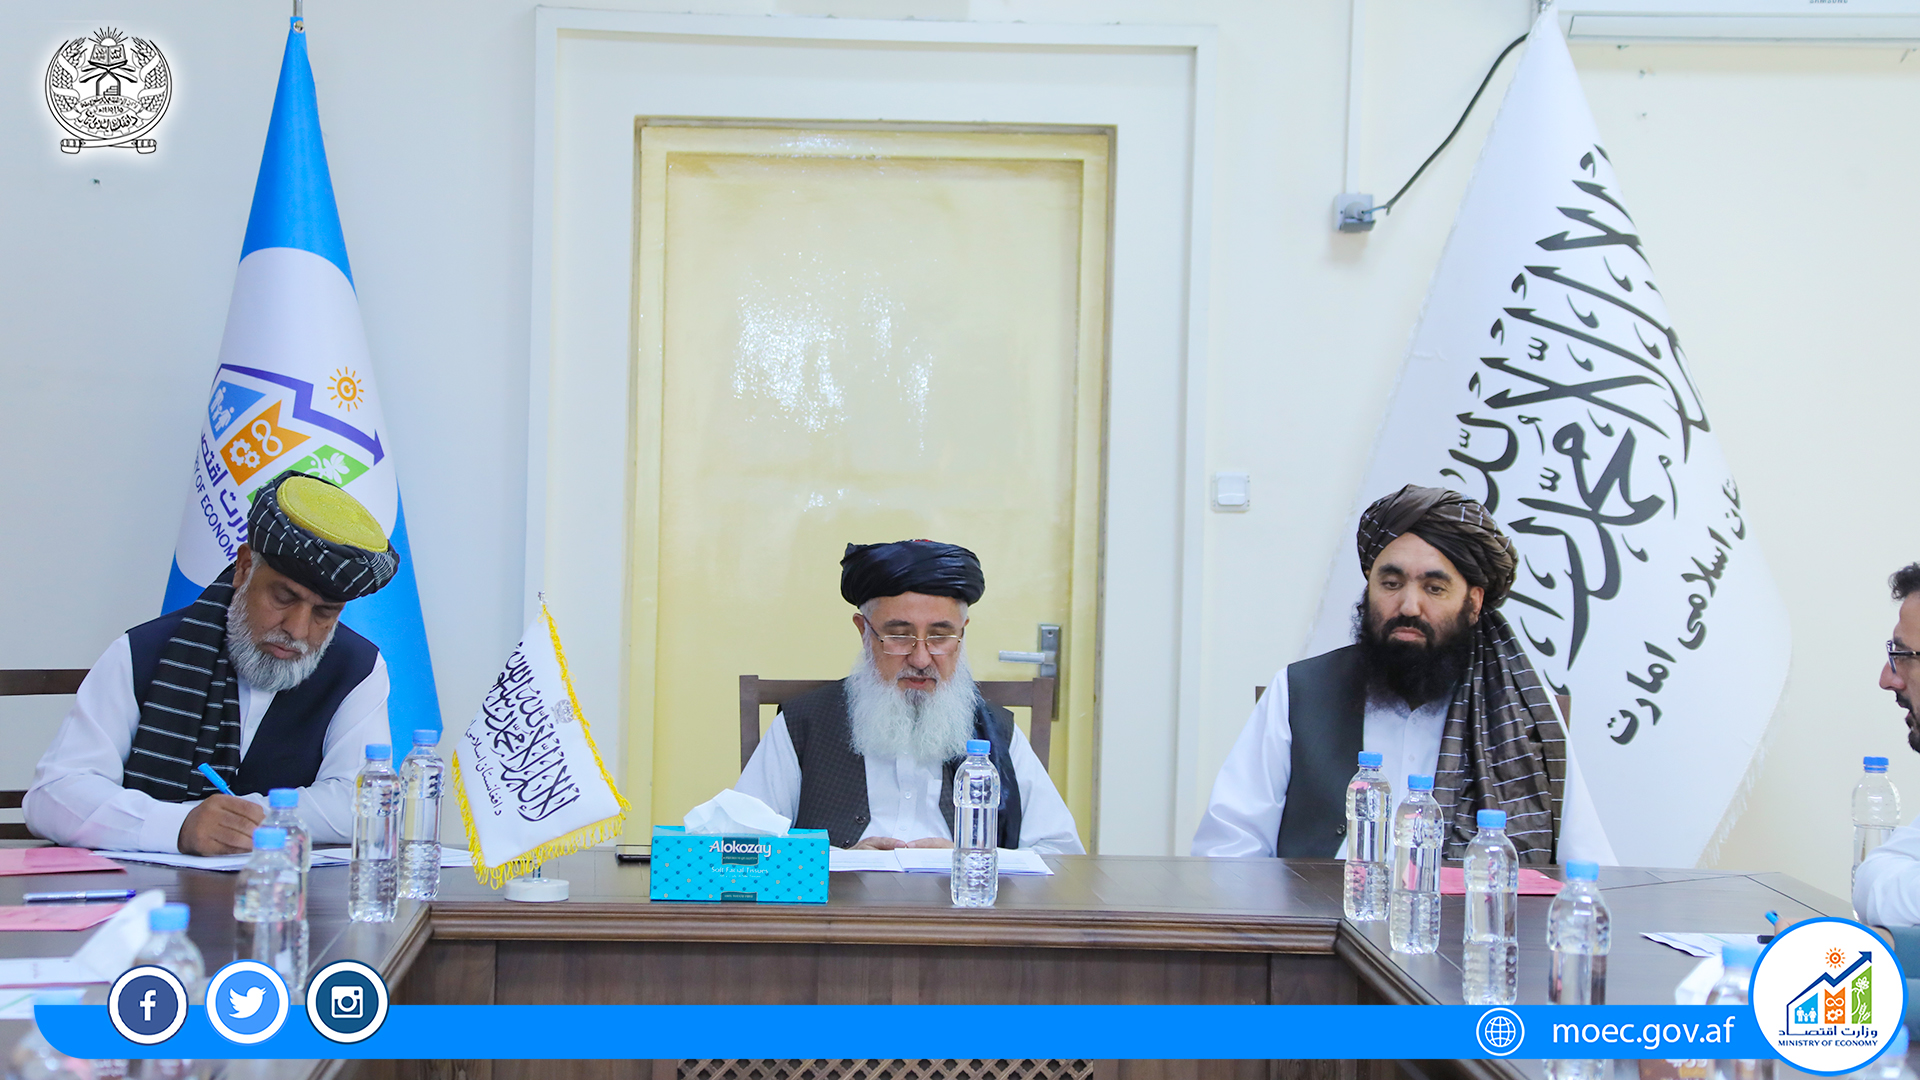 The fifth assembly of the Supreme Transport Commission was held under the chairmanship of Alhaj Qari Din Mohammad "Hanif", Acting Minister of Economy